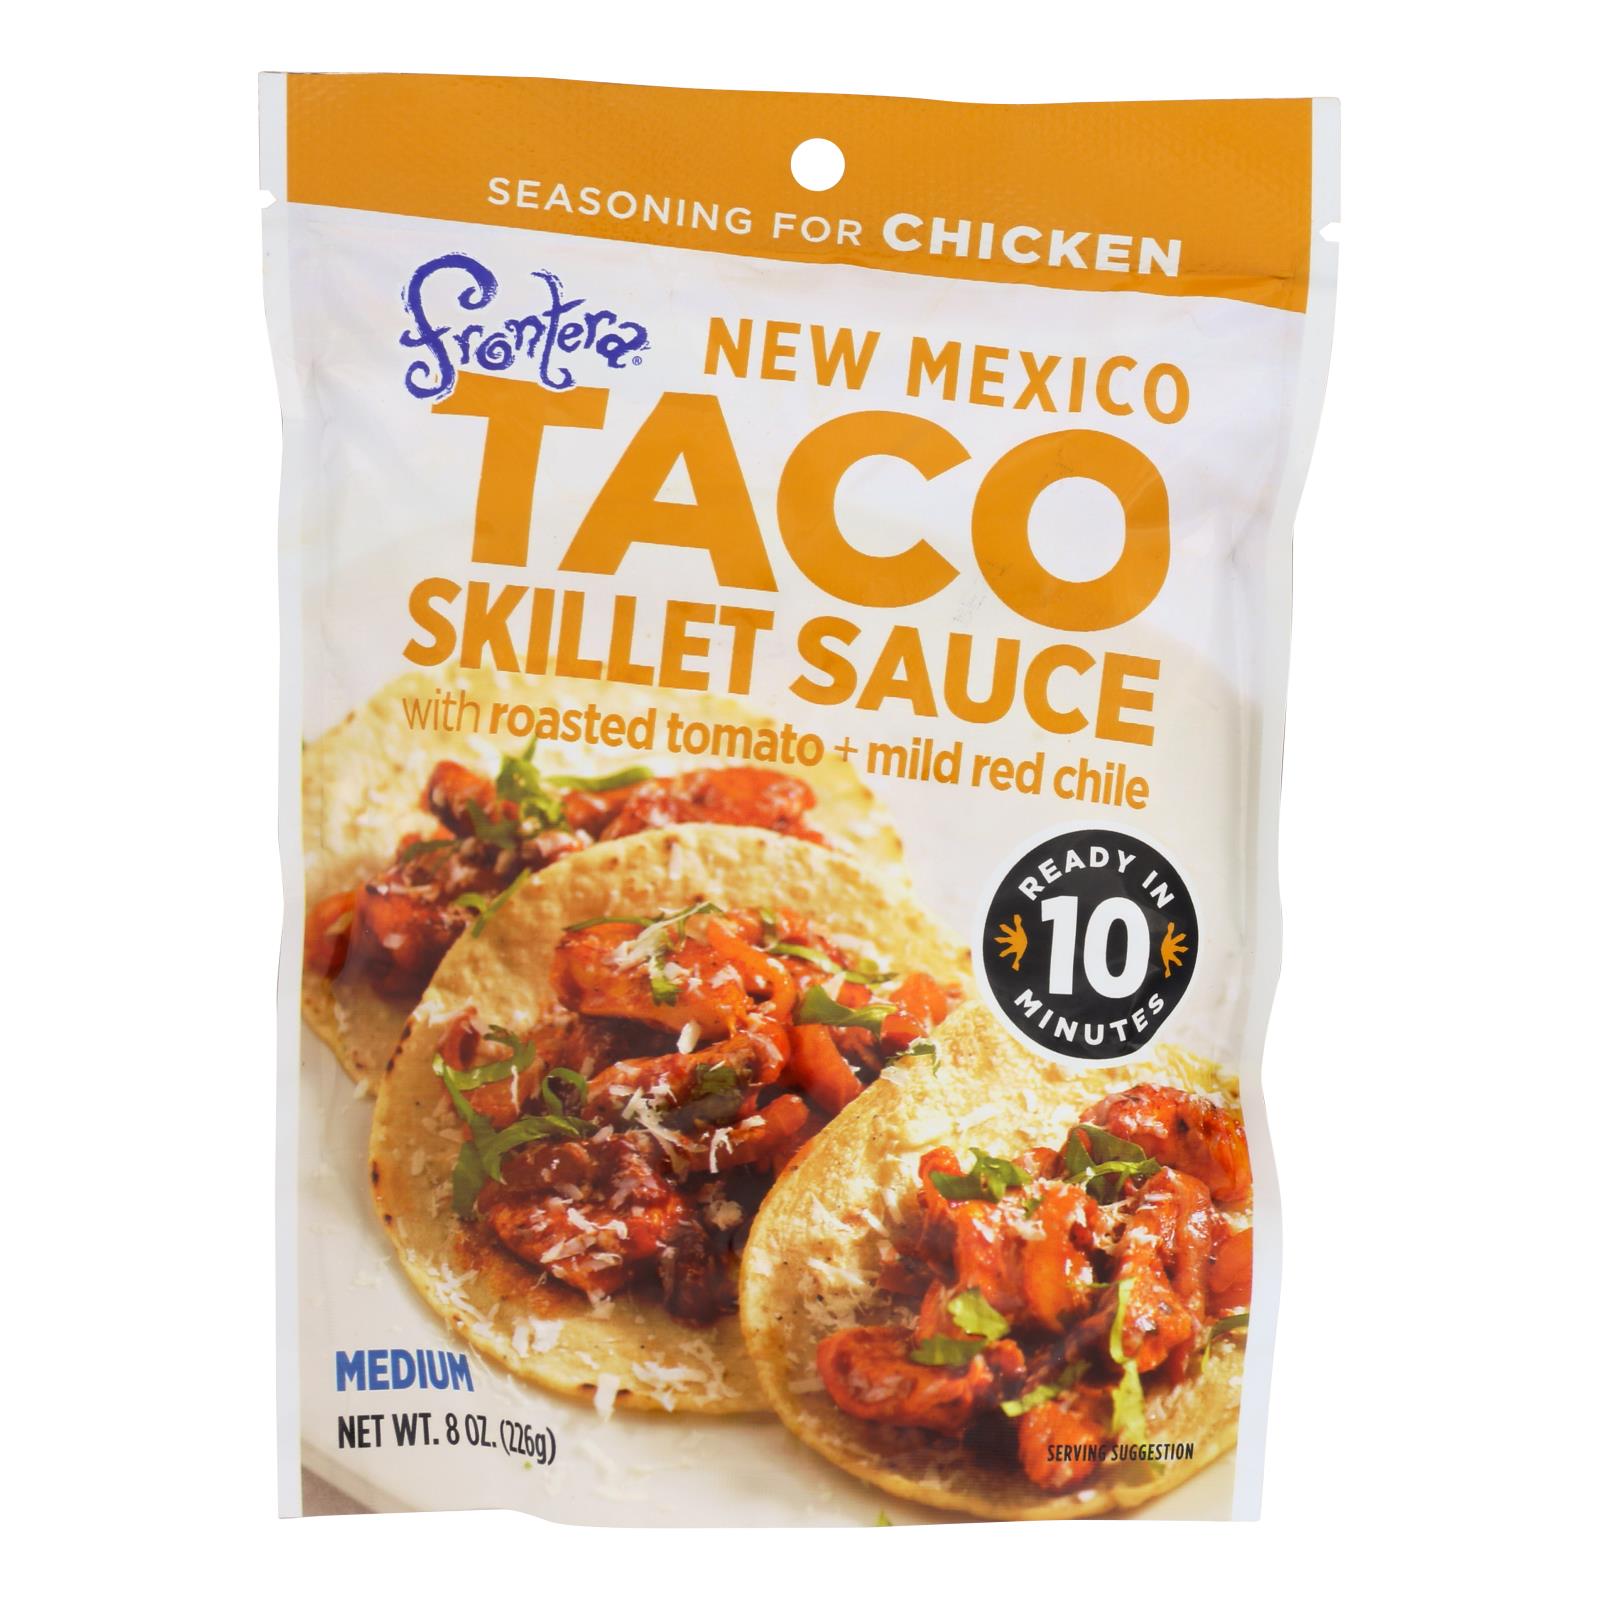 Frontera Foods New Mexico Taco Skillet Sauce - New Mexico - Case Of 6 - 8 Oz.